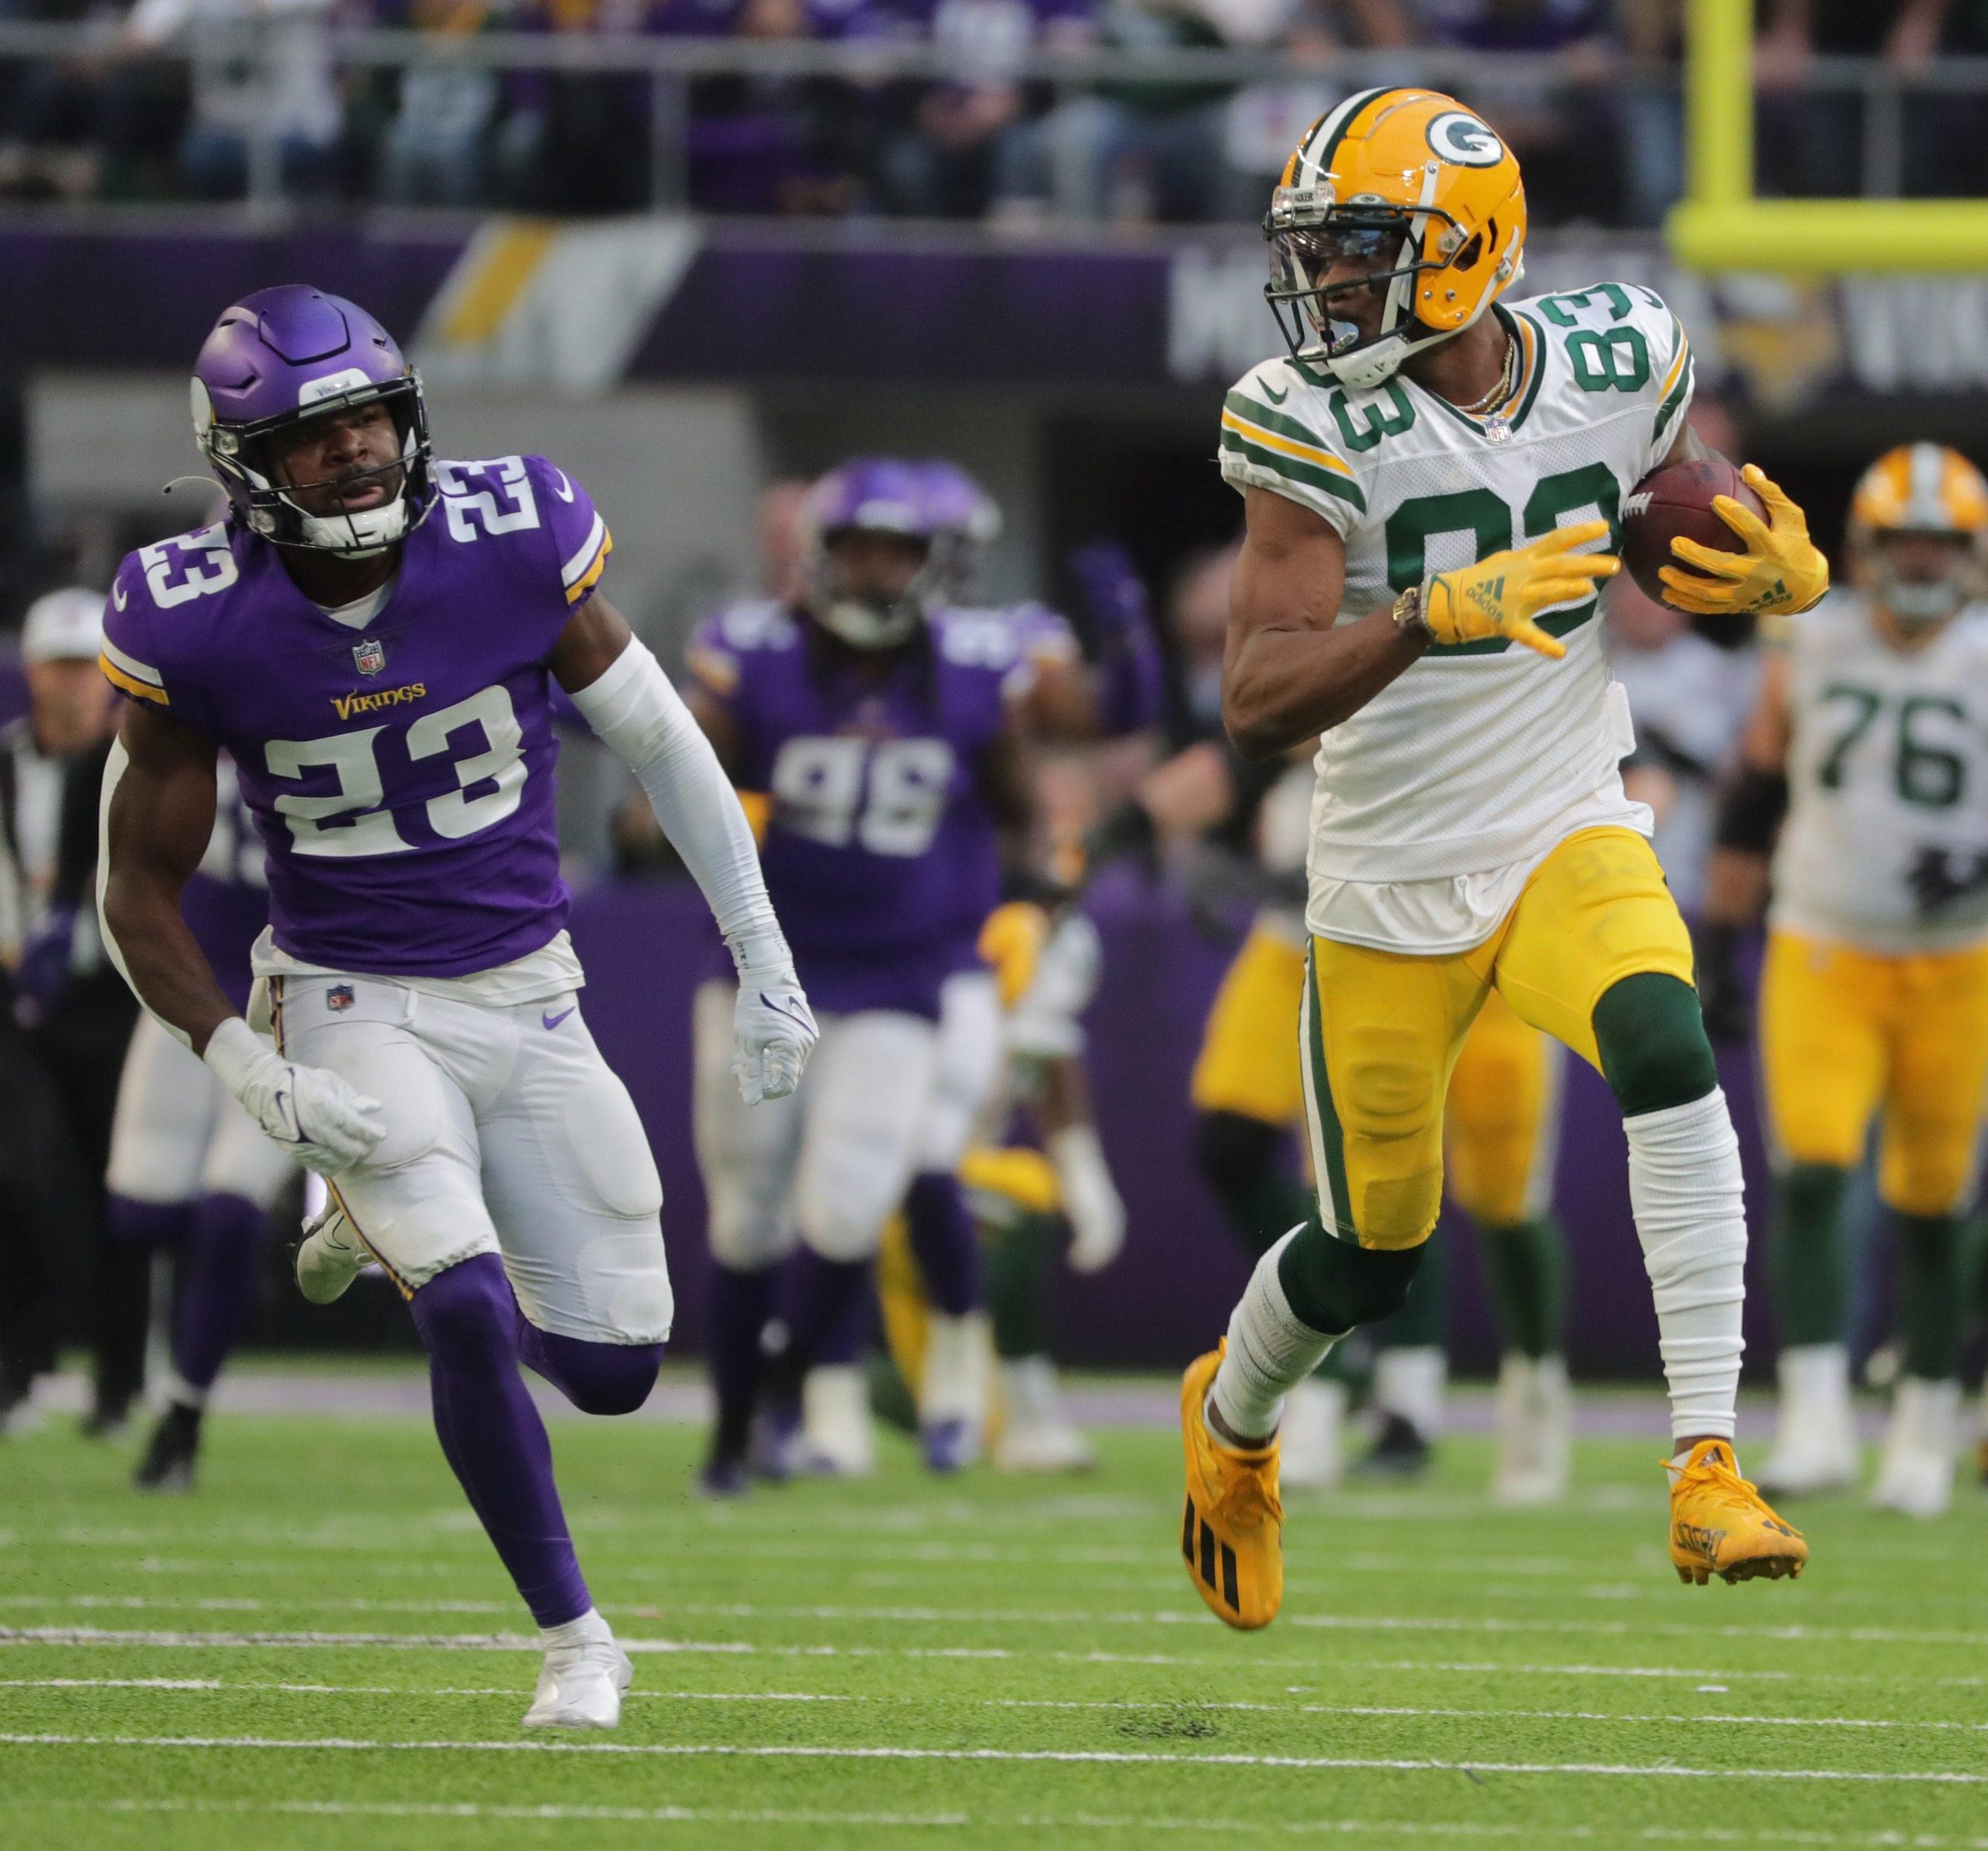 Best NFL player prop for SNF Minnesota Vikings vs Green Bay Packers